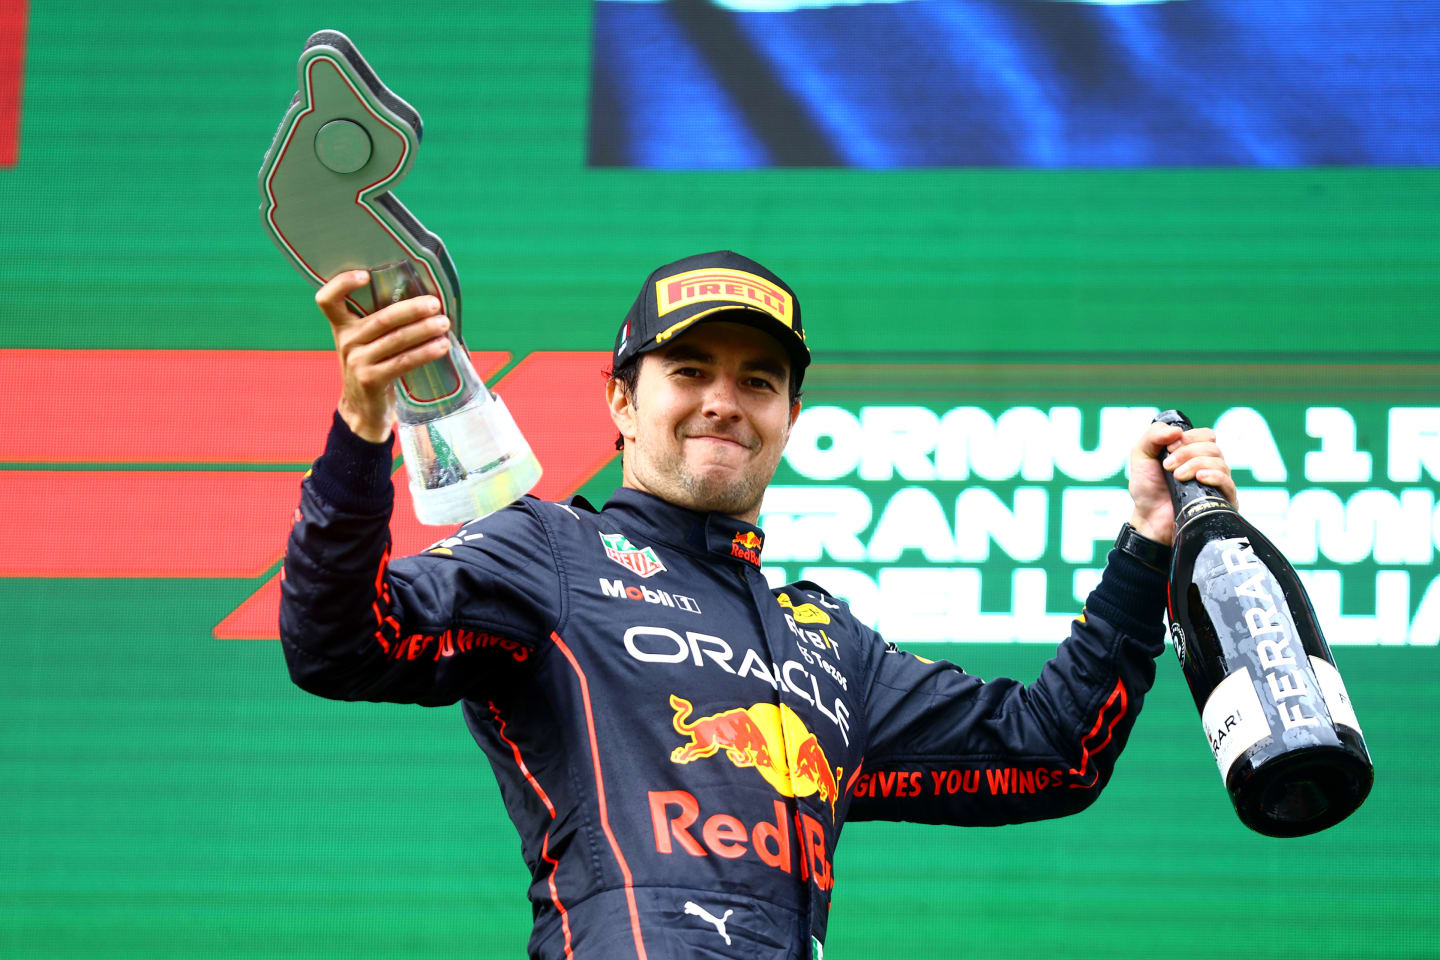 IMOLA, ITALY - APRIL 24: Second placed Sergio Perez of Mexico and Oracle Red Bull Racing celebrates on the podium during the F1 Grand Prix of Emilia Romagna at Autodromo Enzo e Dino Ferrari on April 24, 2022 in Imola, Italy. (Photo by Mark Thompson/Getty Images)